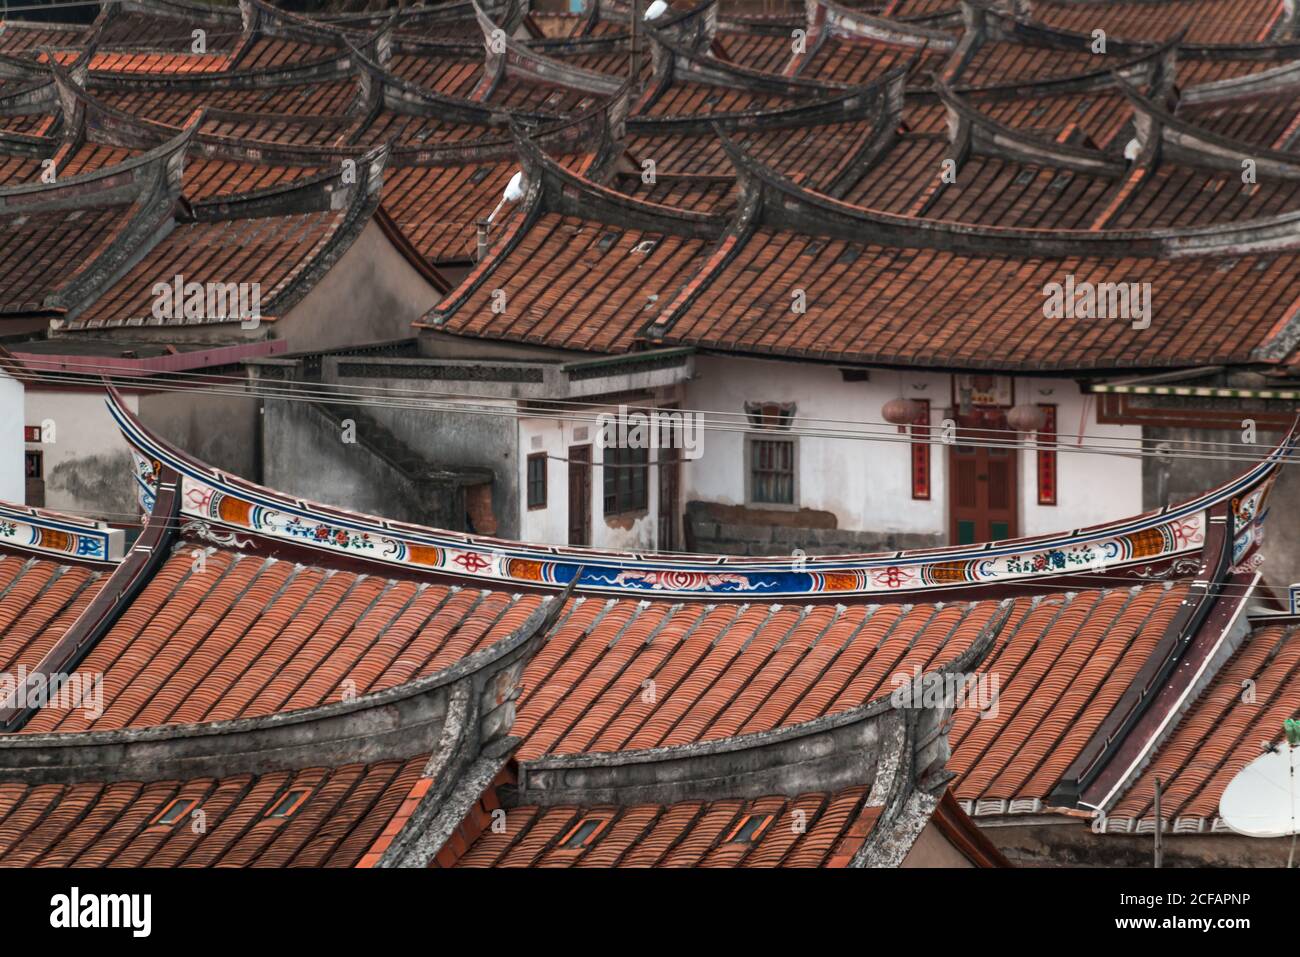 Aerial view of aged oriental buildings with curved roofs covered with tile and placed in rows in Daimei Village Stock Photo